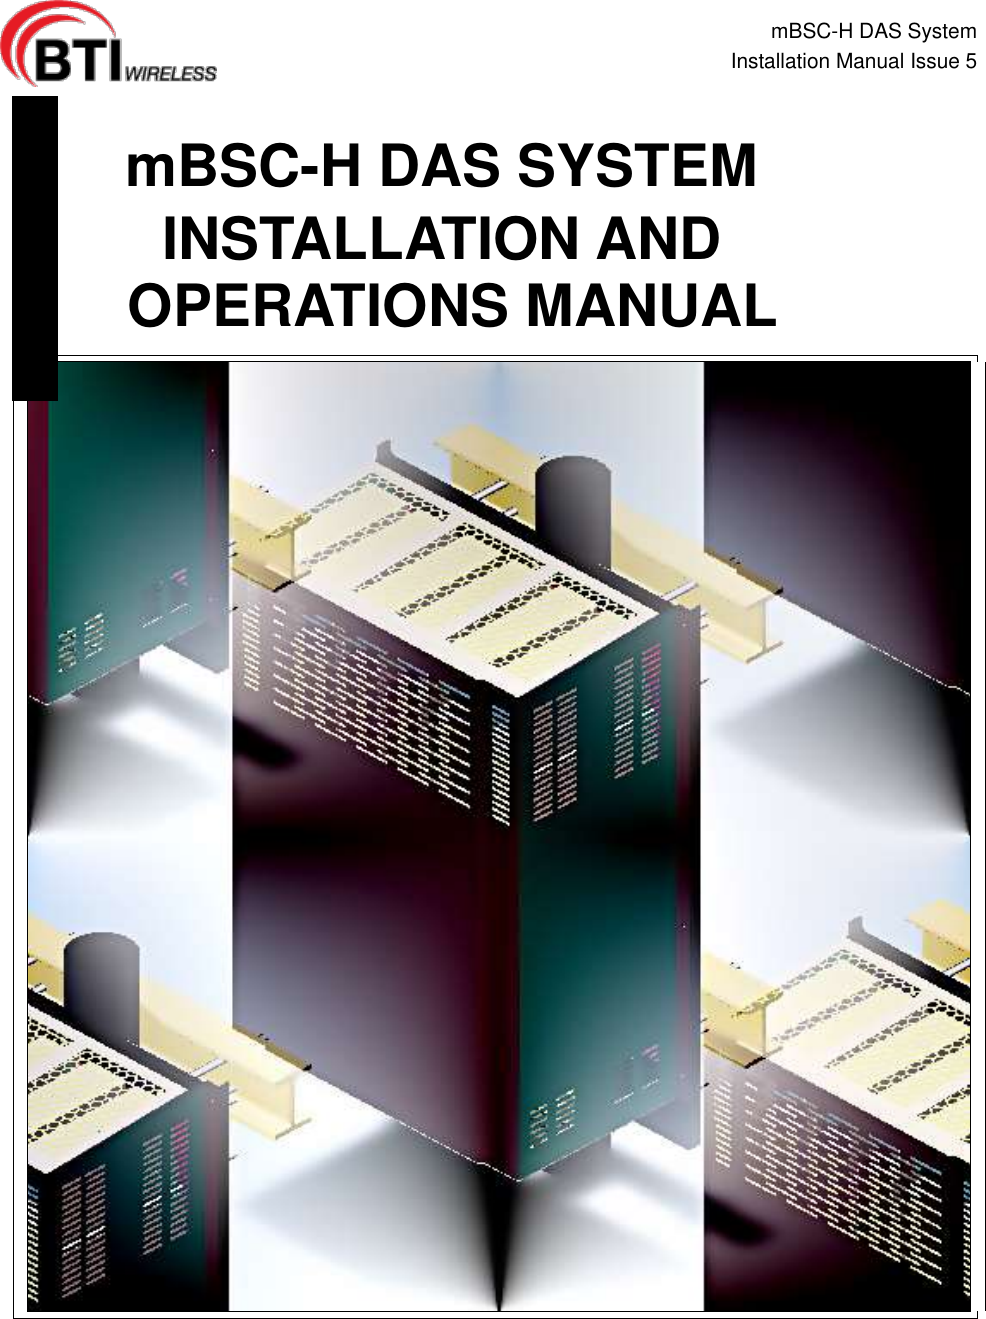 mBSC-H DAS System Installation Manual Issue 5                        mBSC-H DAS SYSTEM INSTALLATION AND OPERATIONS MANUAL 